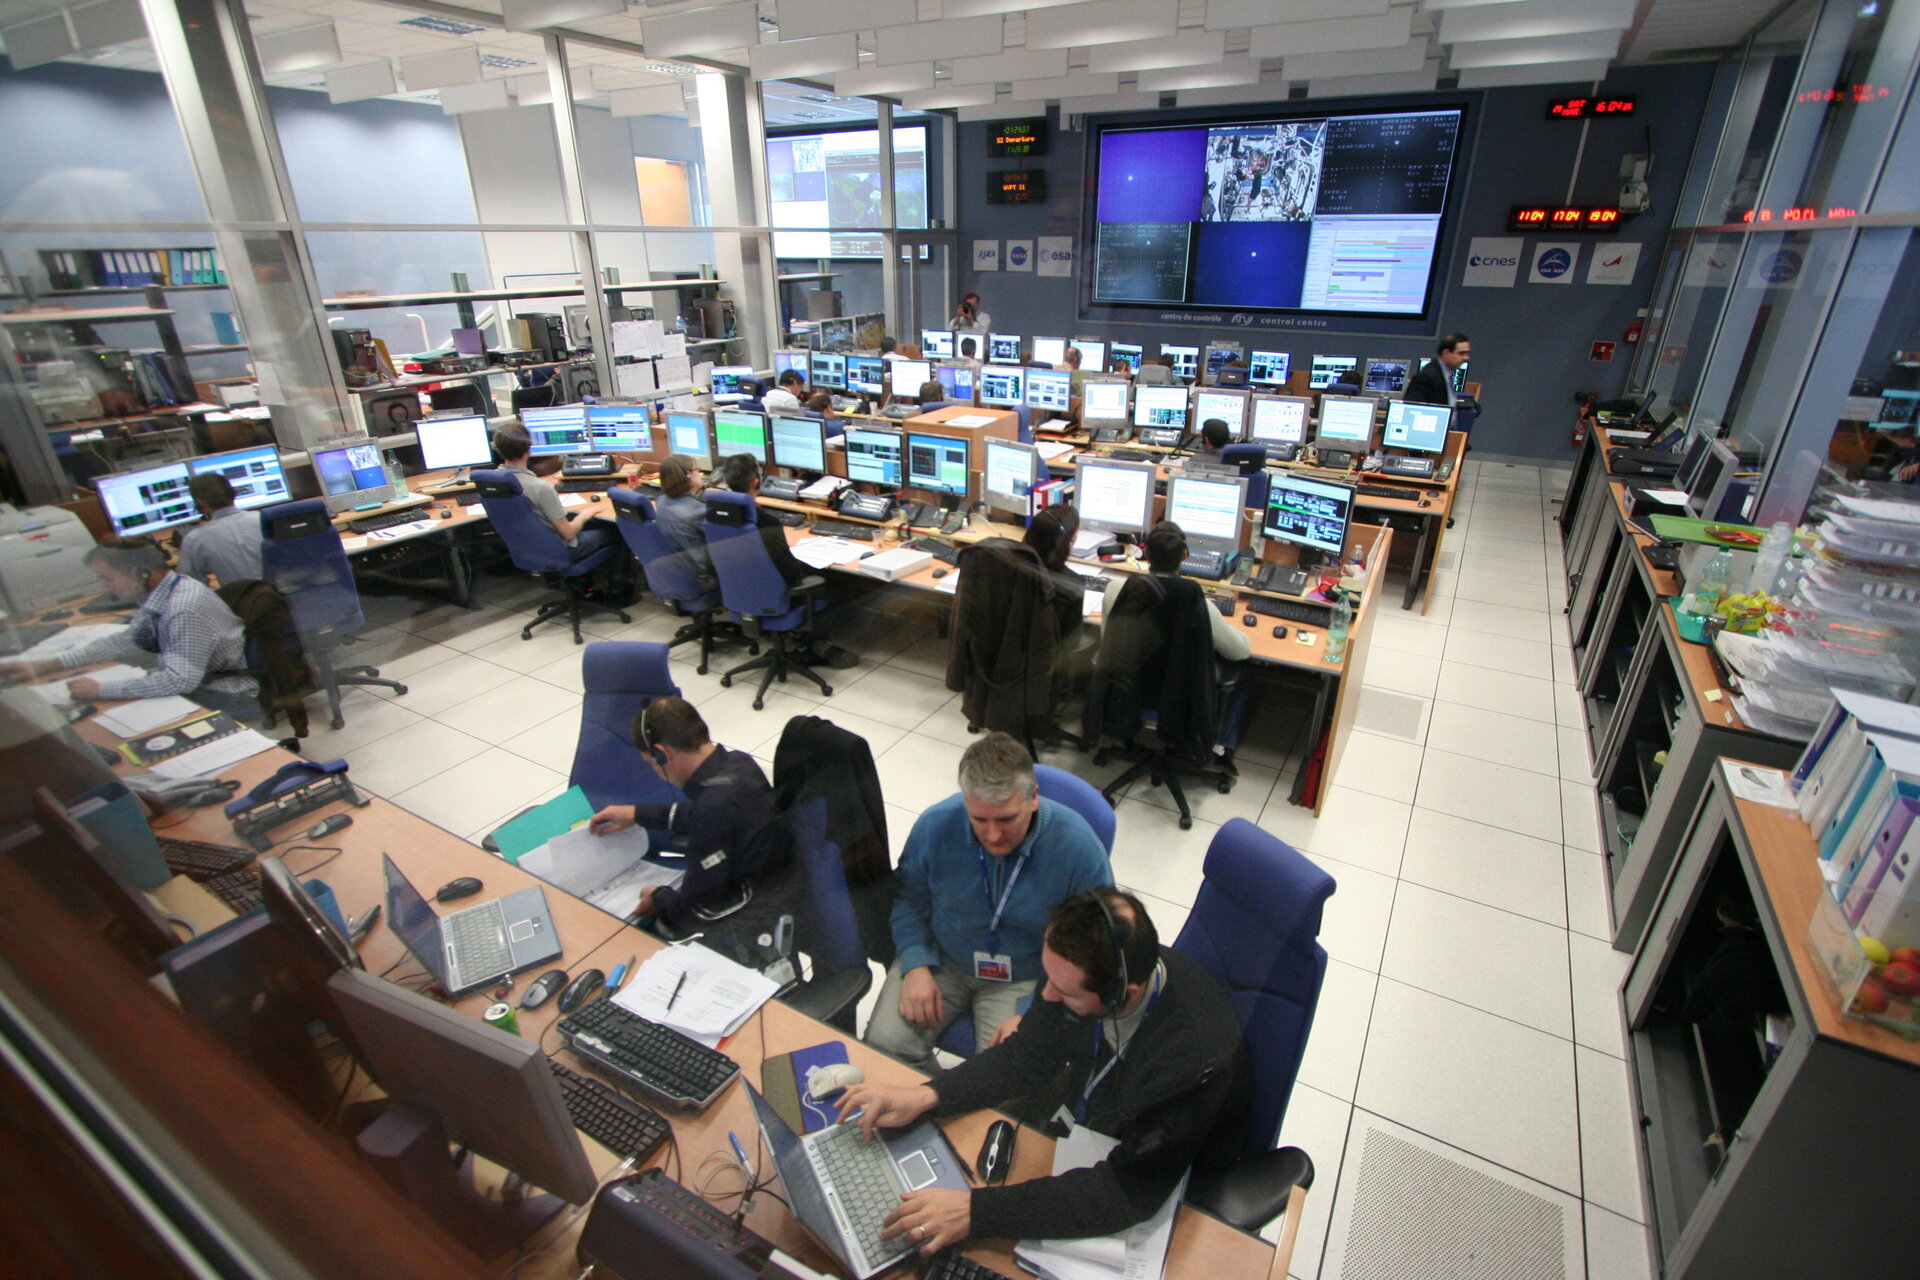 View inside the ATV Control Centre during Demonstration Day 1